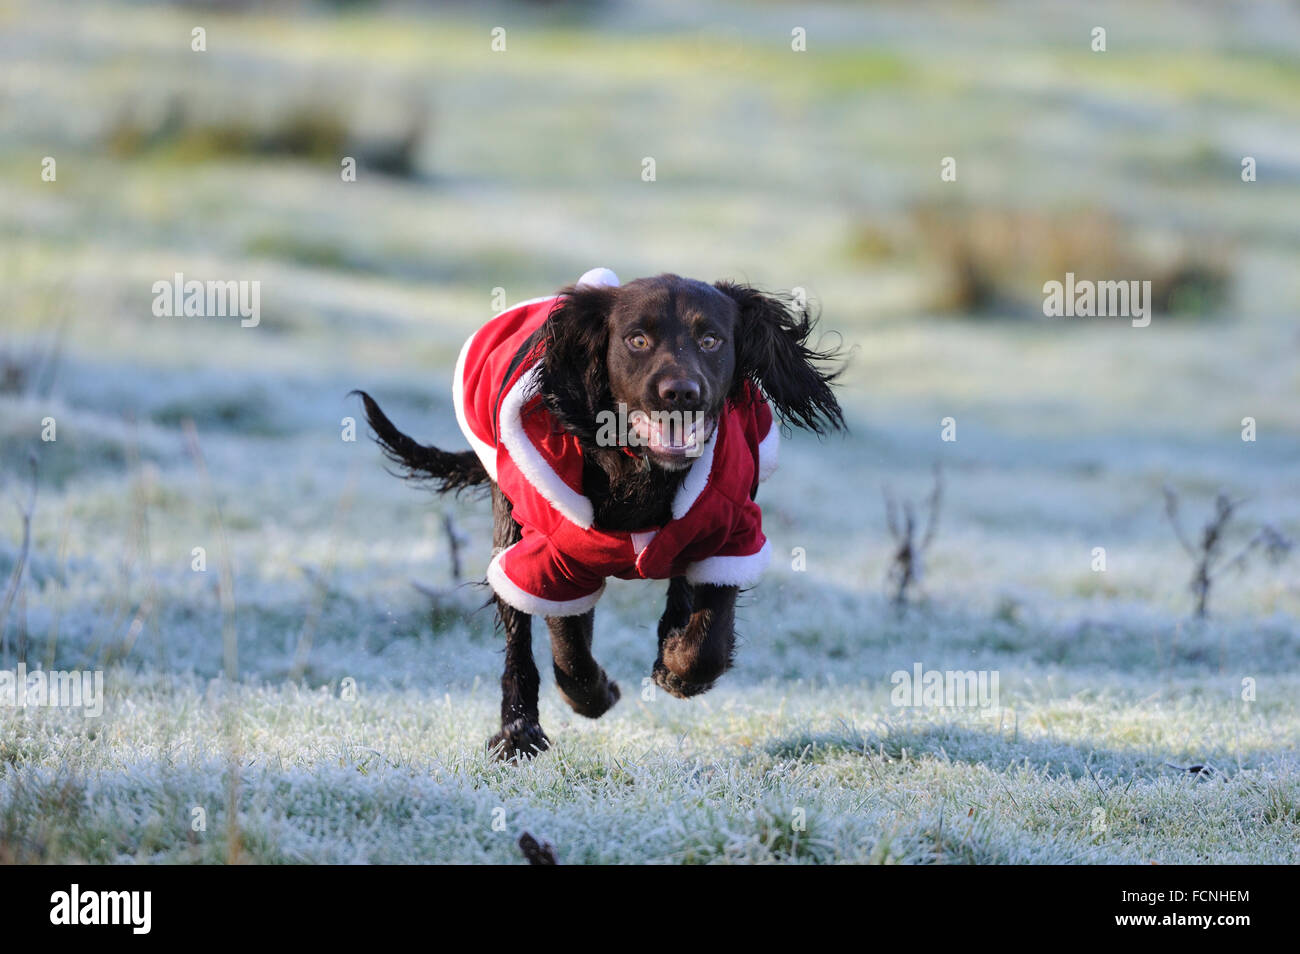 Working Cocker Spaniel (male), 8 months old, running in a Santa outfit, in frosty field, Bentley, Suffolk, Dec 2014 Stock Photo